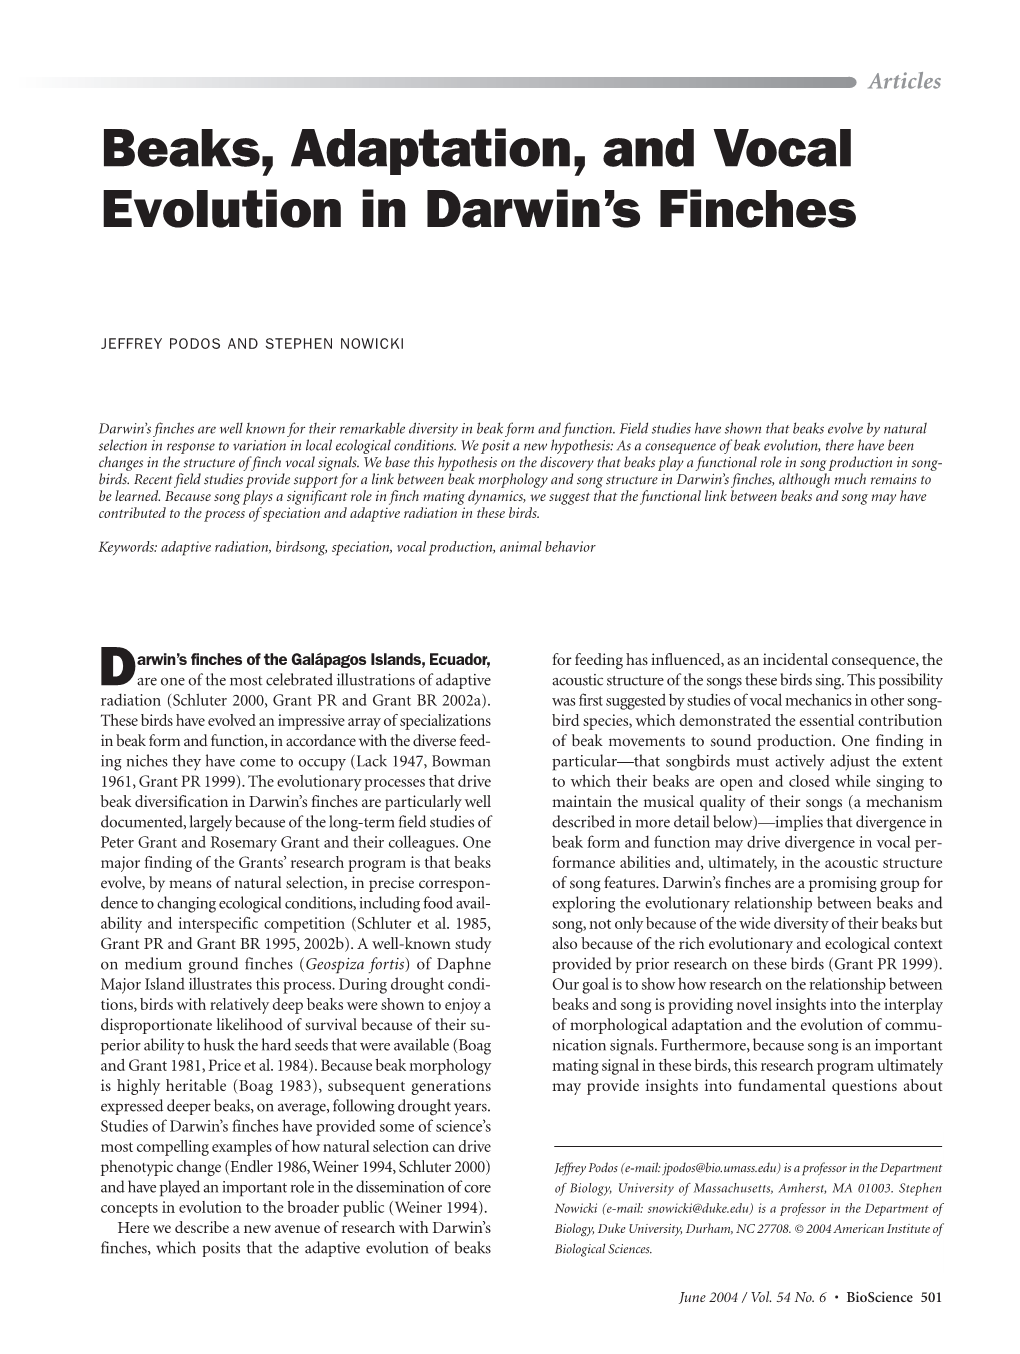 Beaks, Adaptation, and Vocal Evolution in Darwin's Finches